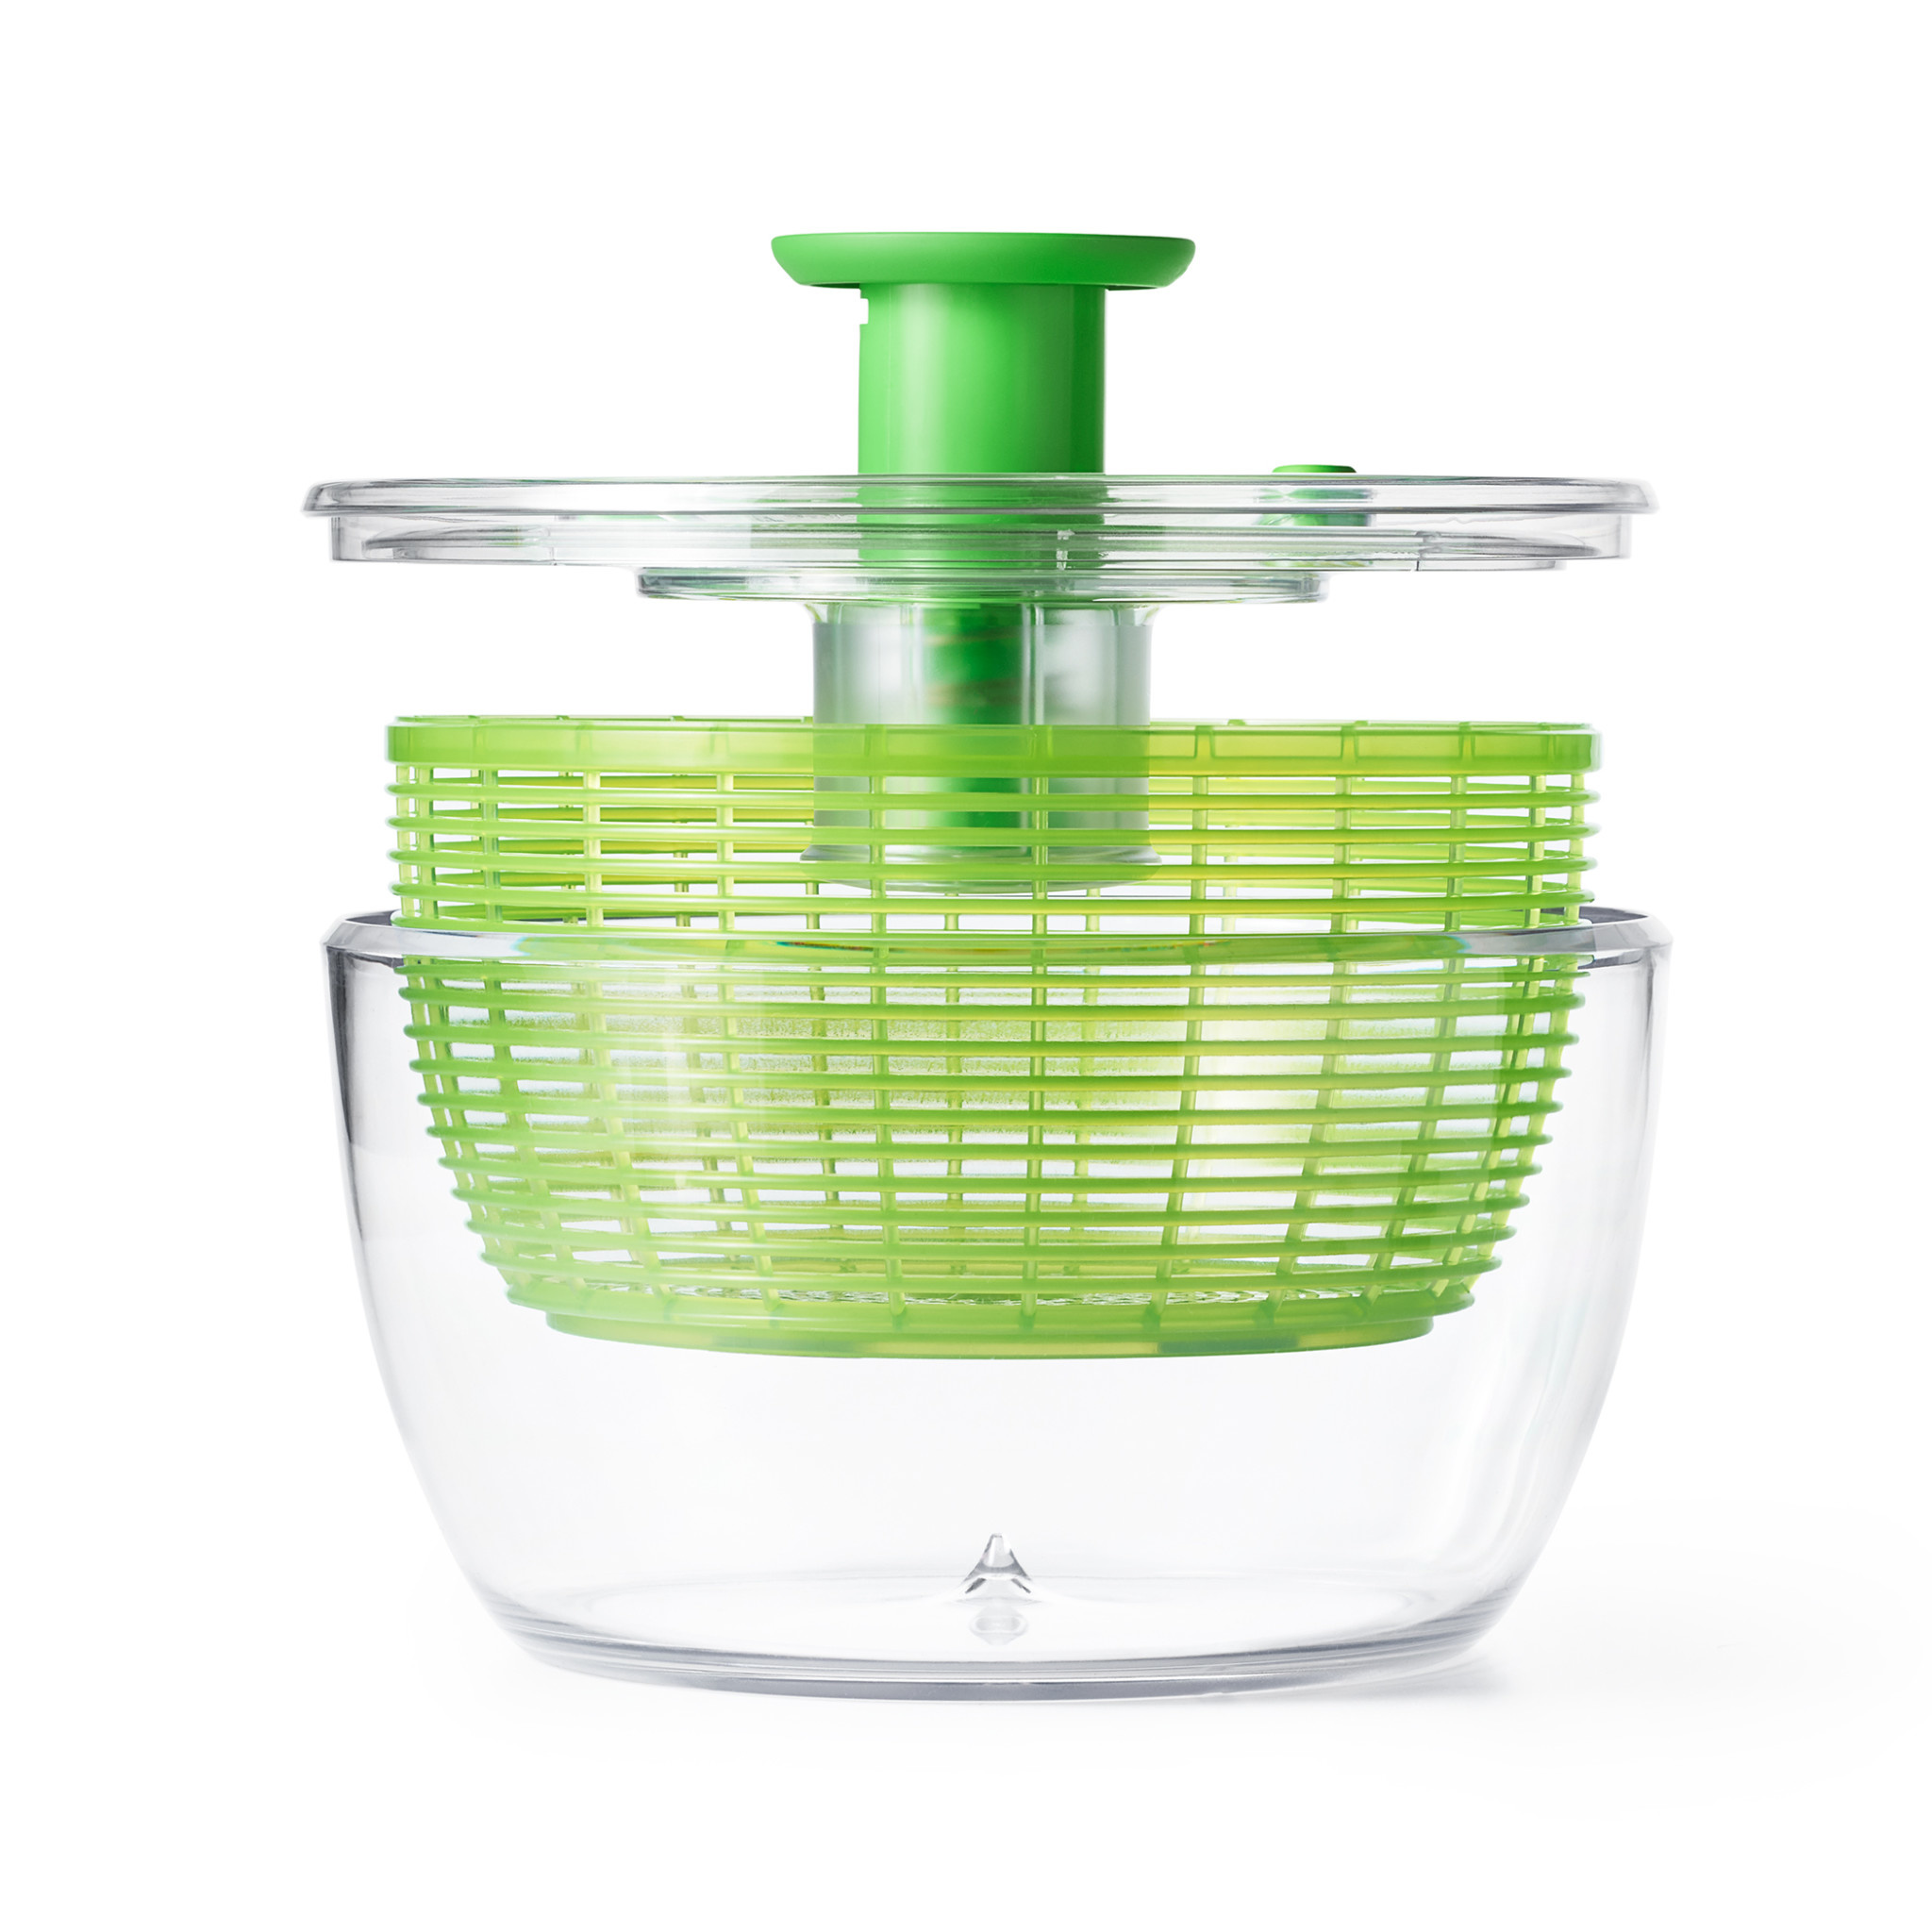 Progressive Collapsible Salad Spinner - Green/White, 3 qt - City